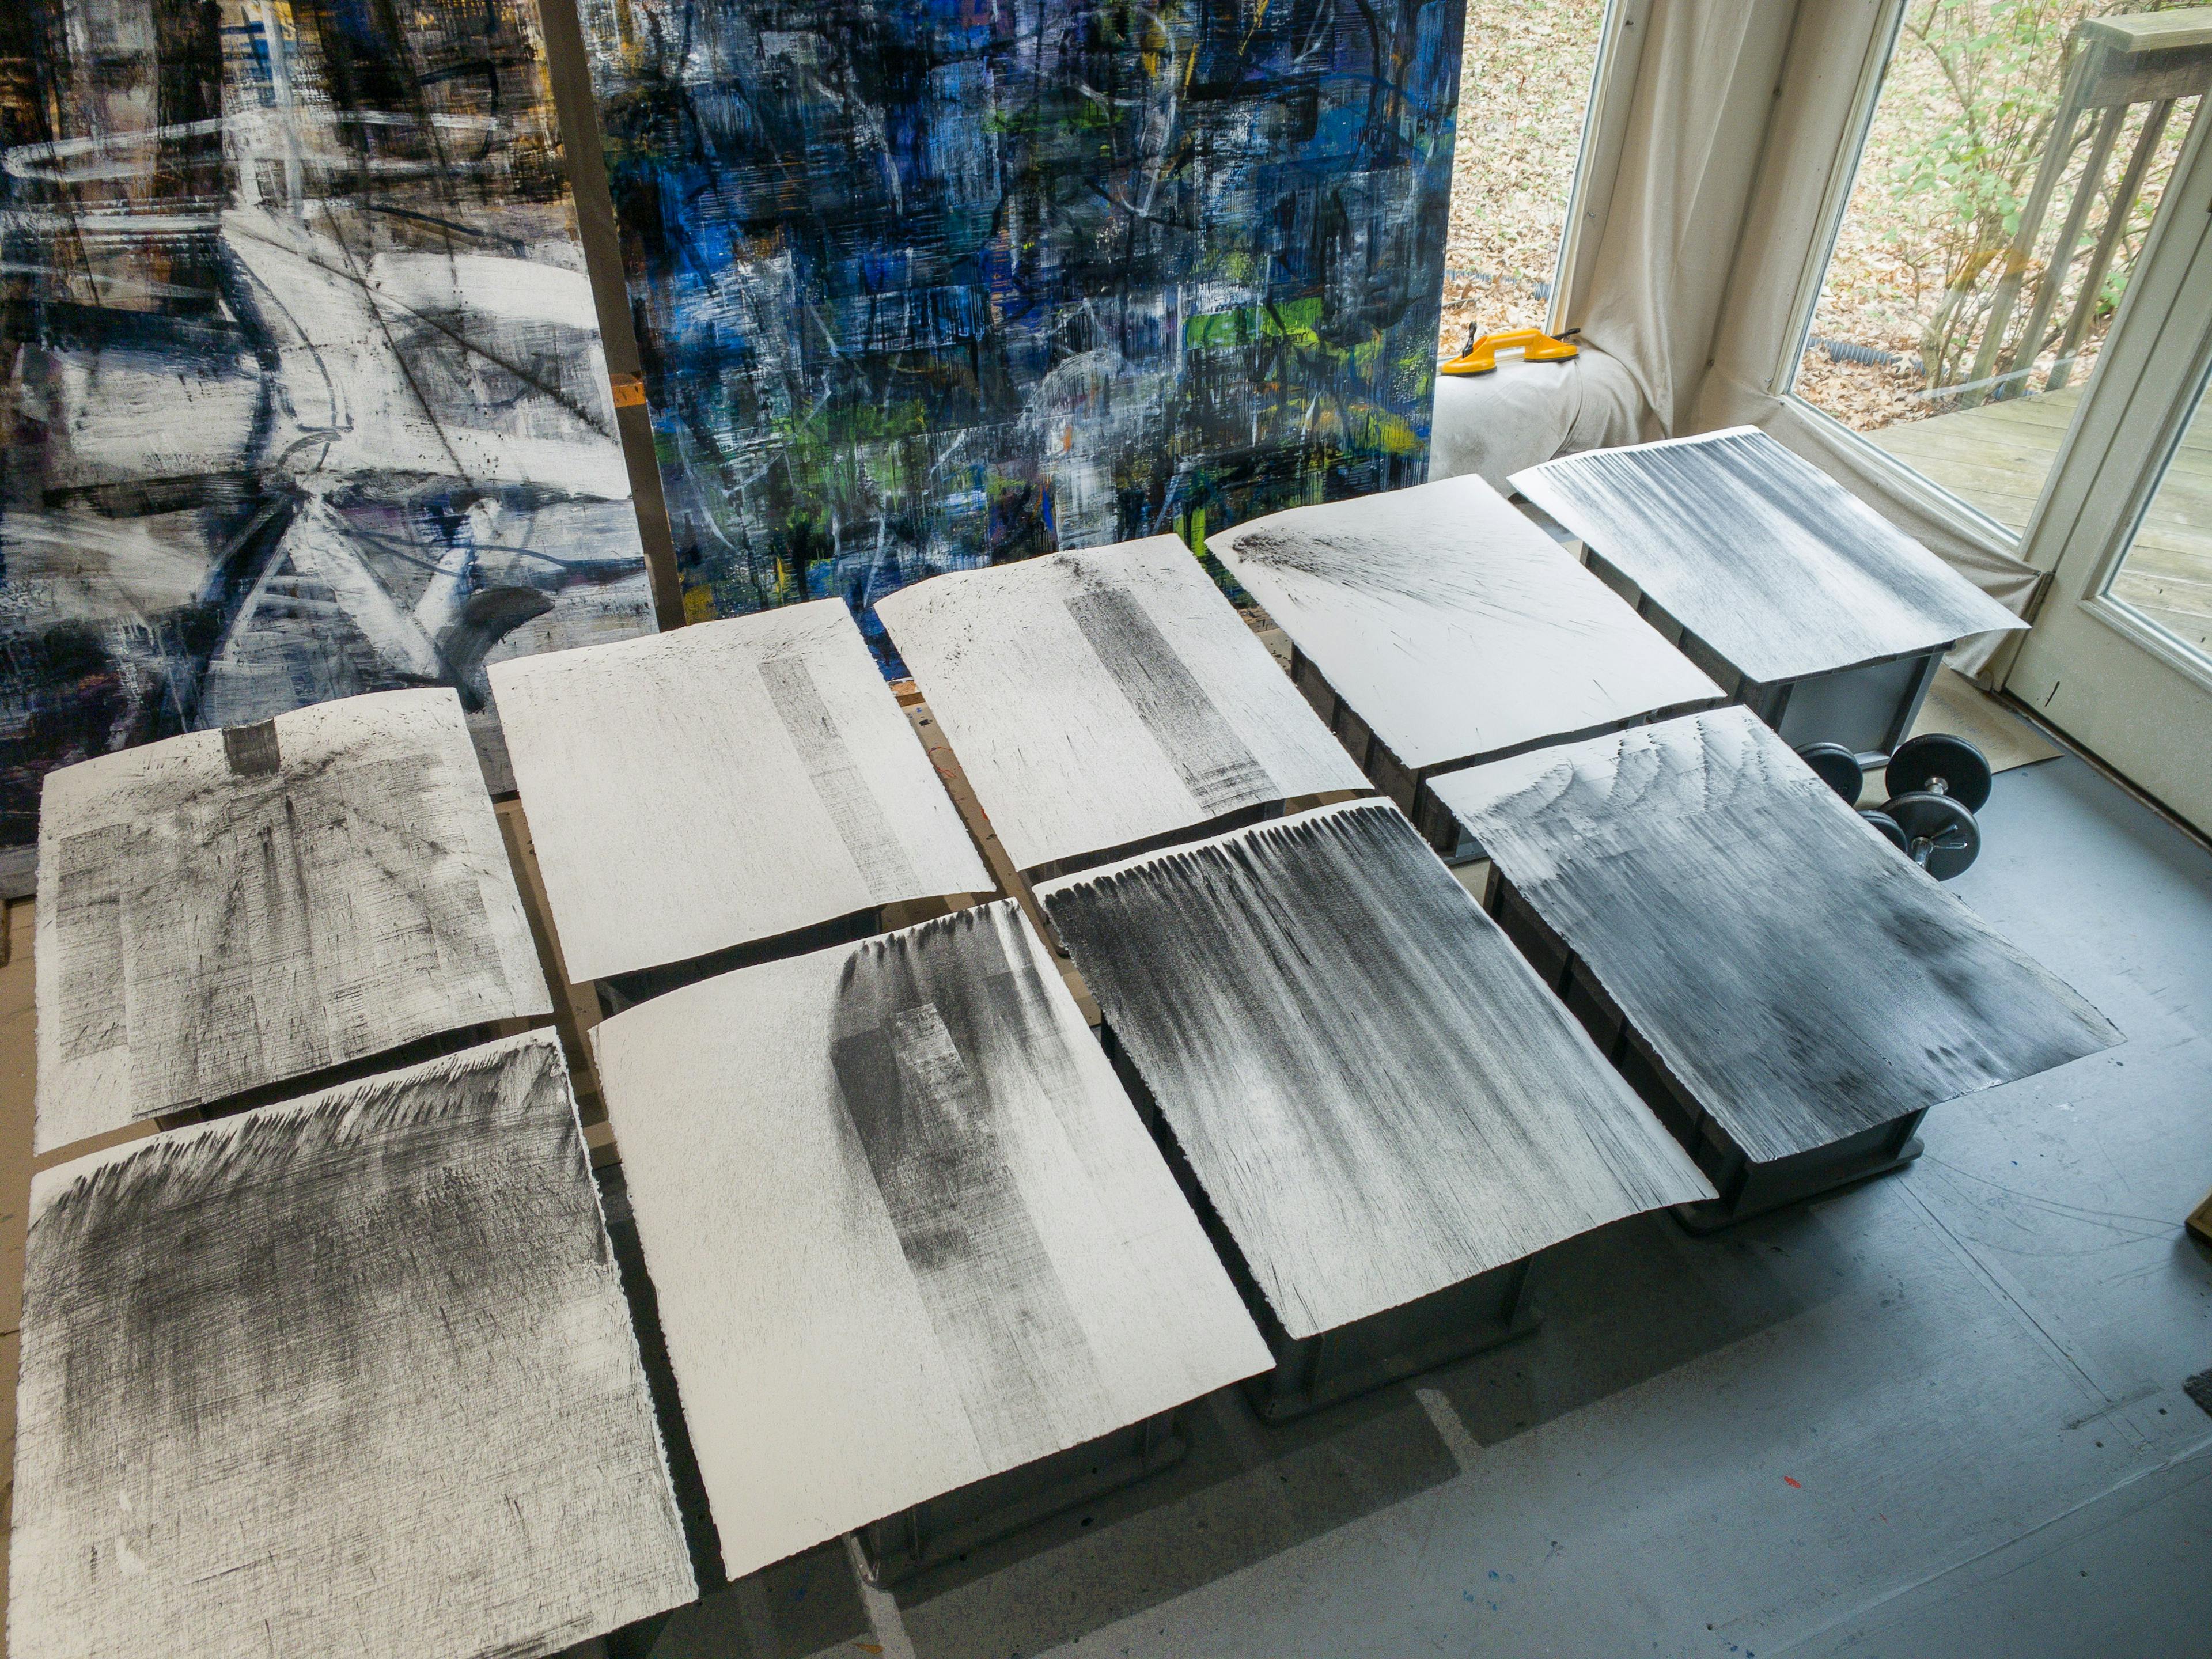 Grouping of works on the floor